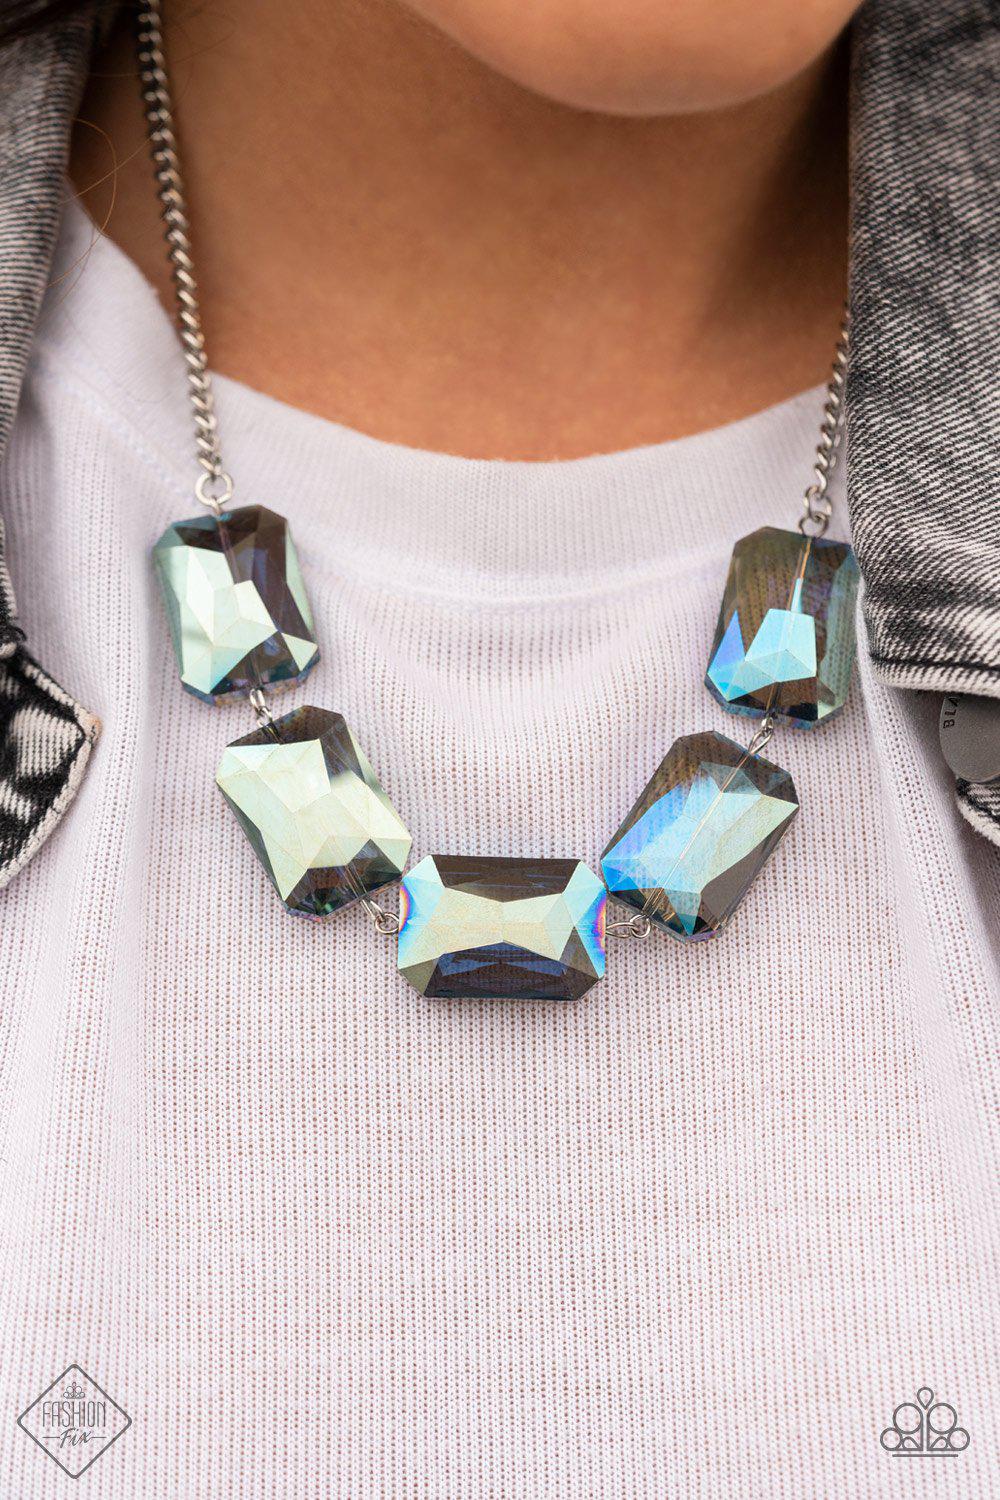 Paparazzi Heard It On The HEIR-Waves Blue Iridescent Necklace February 2021 Fashion Fix